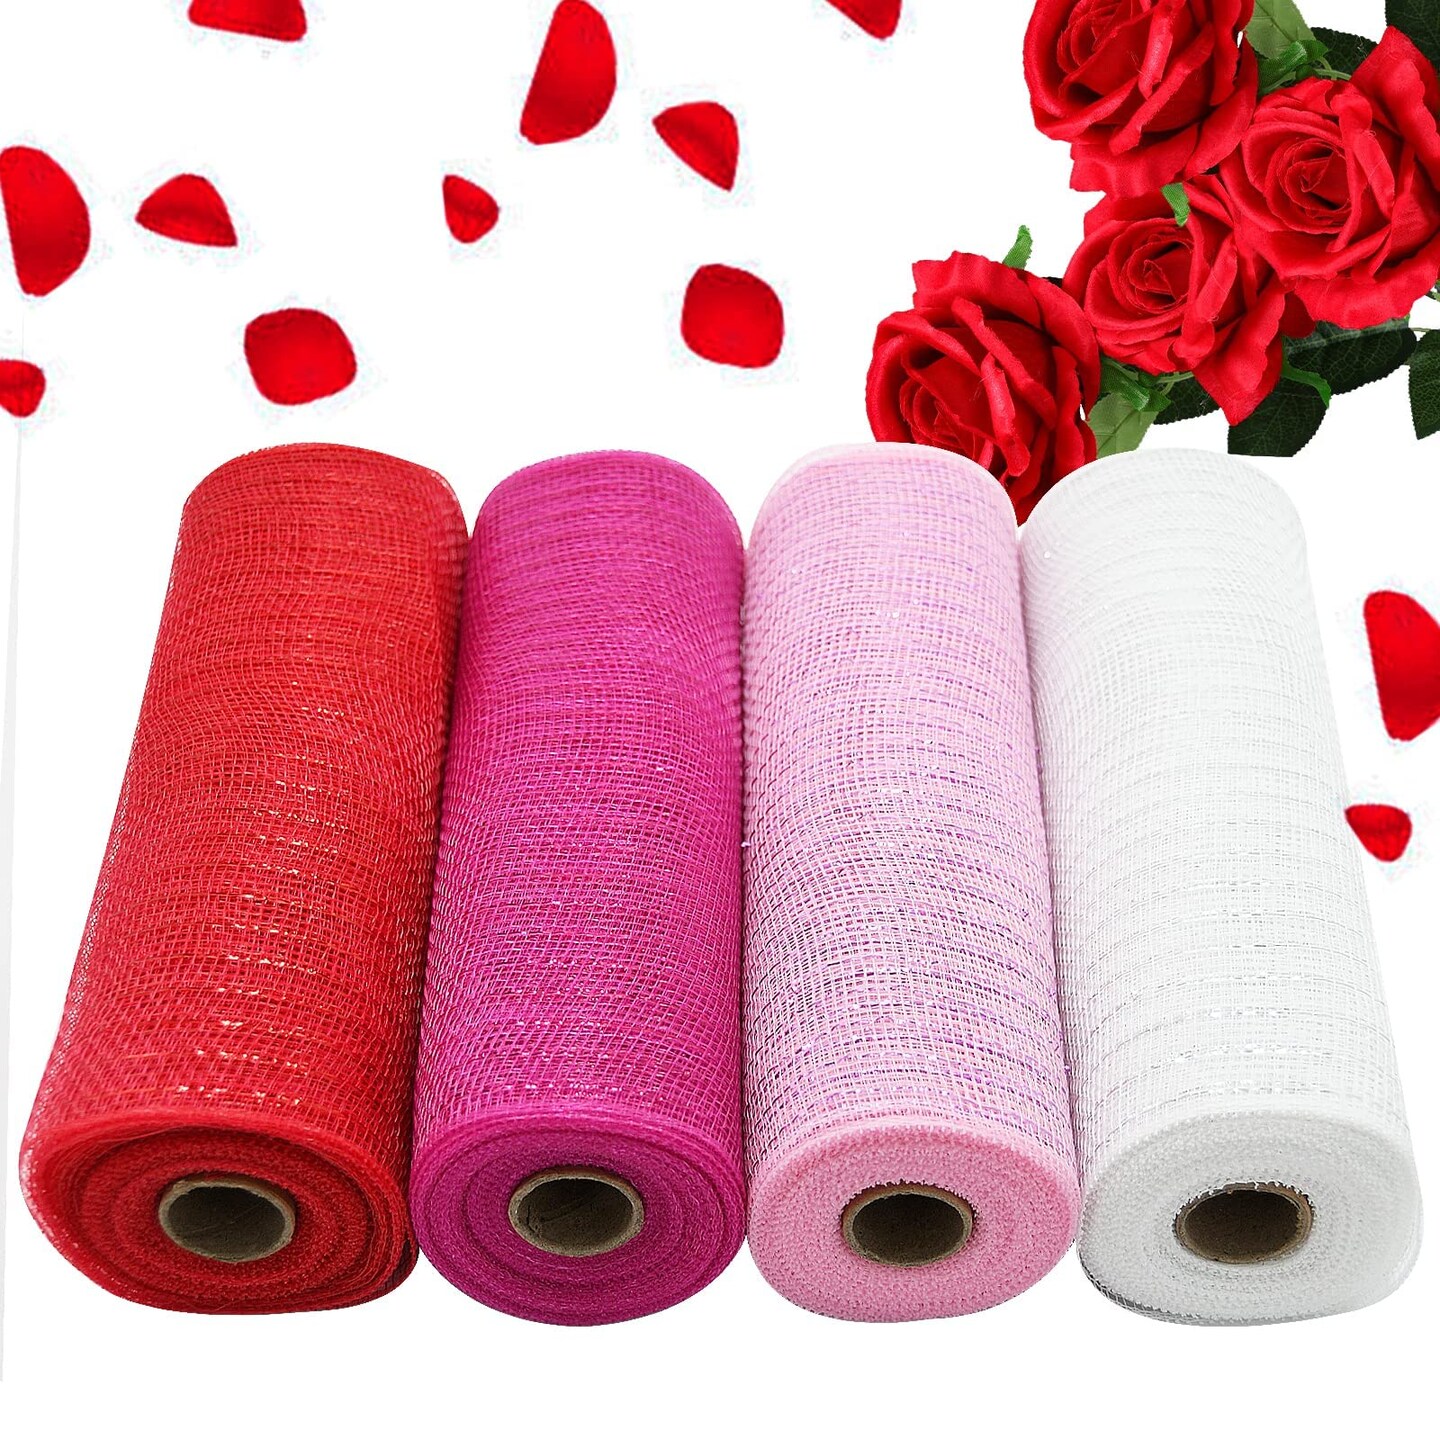 NBHH Valentine&#x27;s Day Gift Ribbon,Satin Ribbons 10 Inch Wide Polyester Fabric Ribbons,White Pink Red Rose red for DIY Crafts,Wedding Decor,Gift Wrapping Decoration and More(4 Rolls)